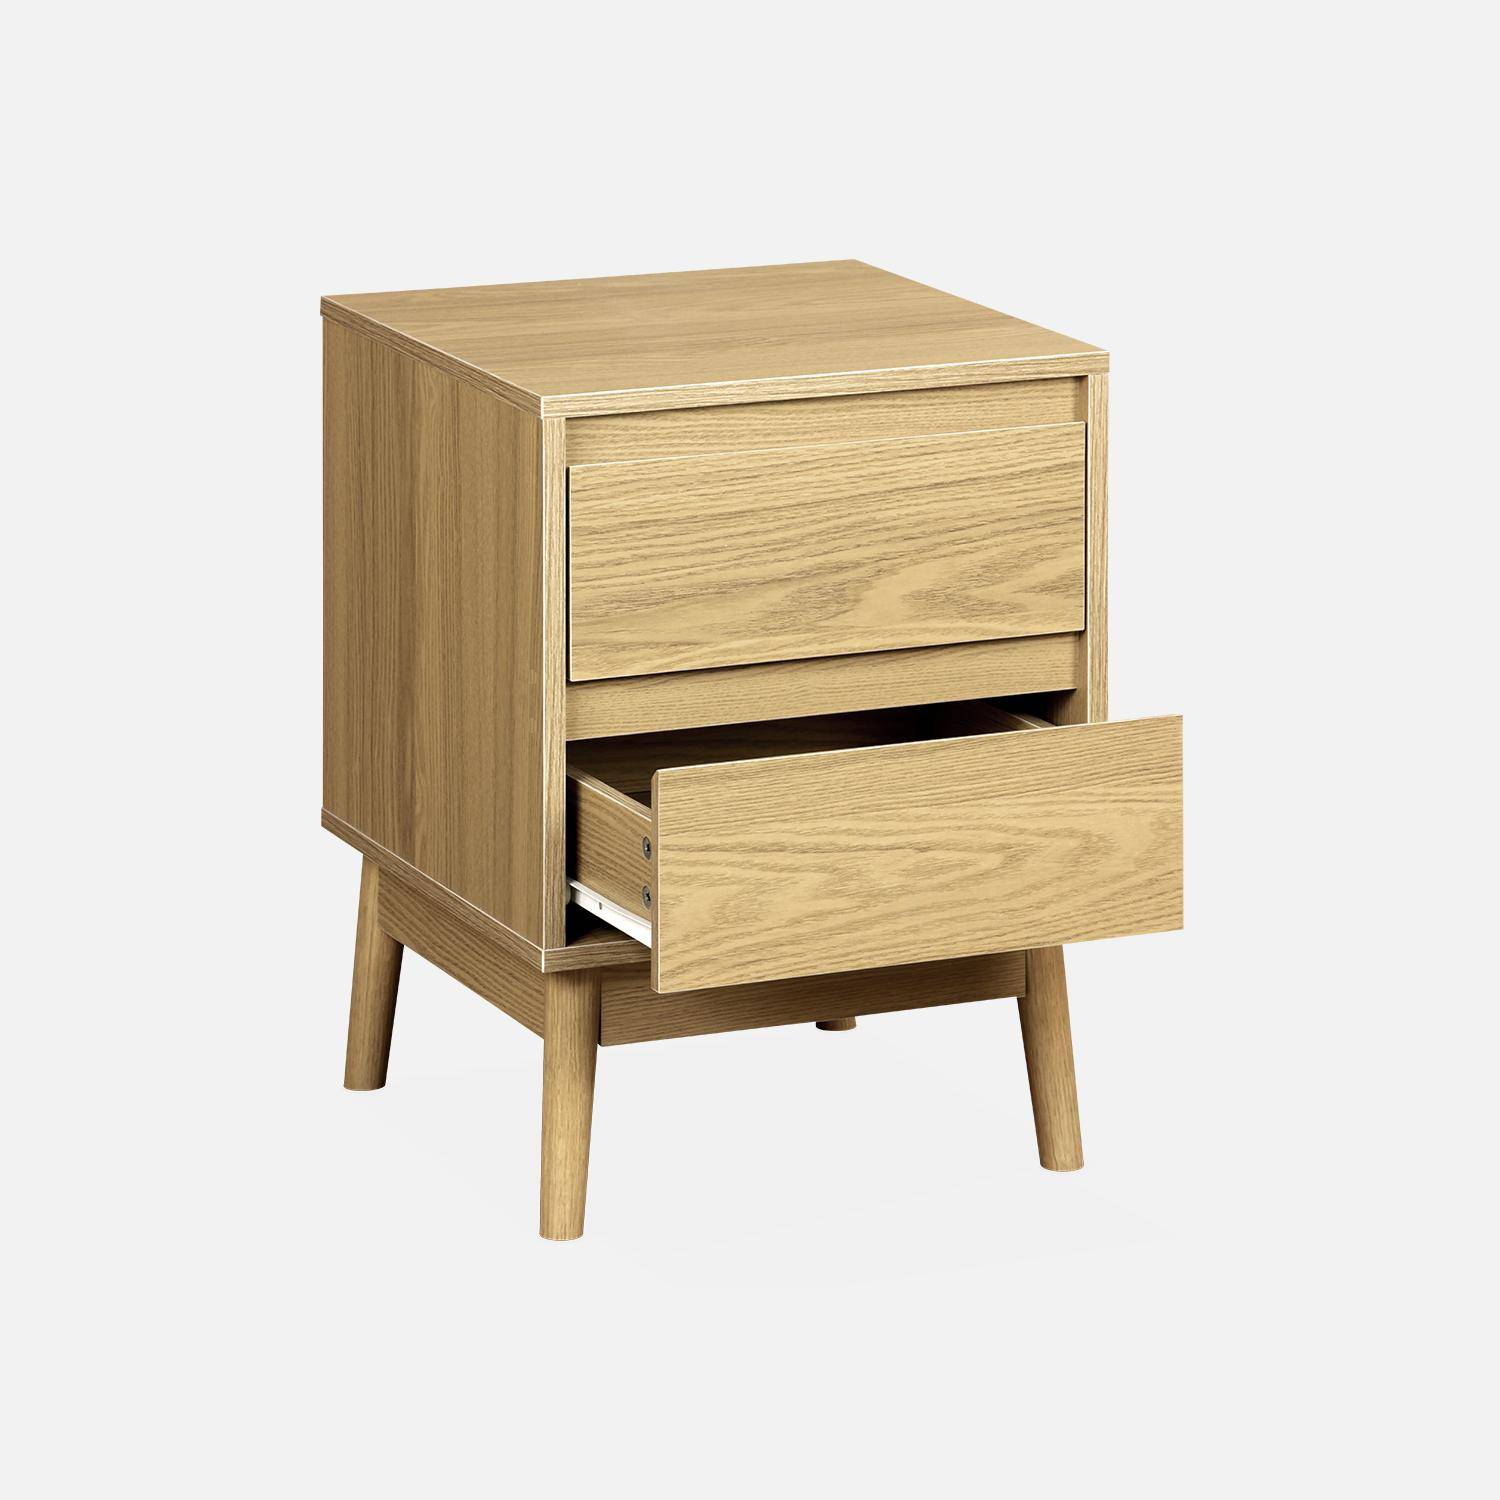 Wooden bedside table, two drawers - Dune Photo5